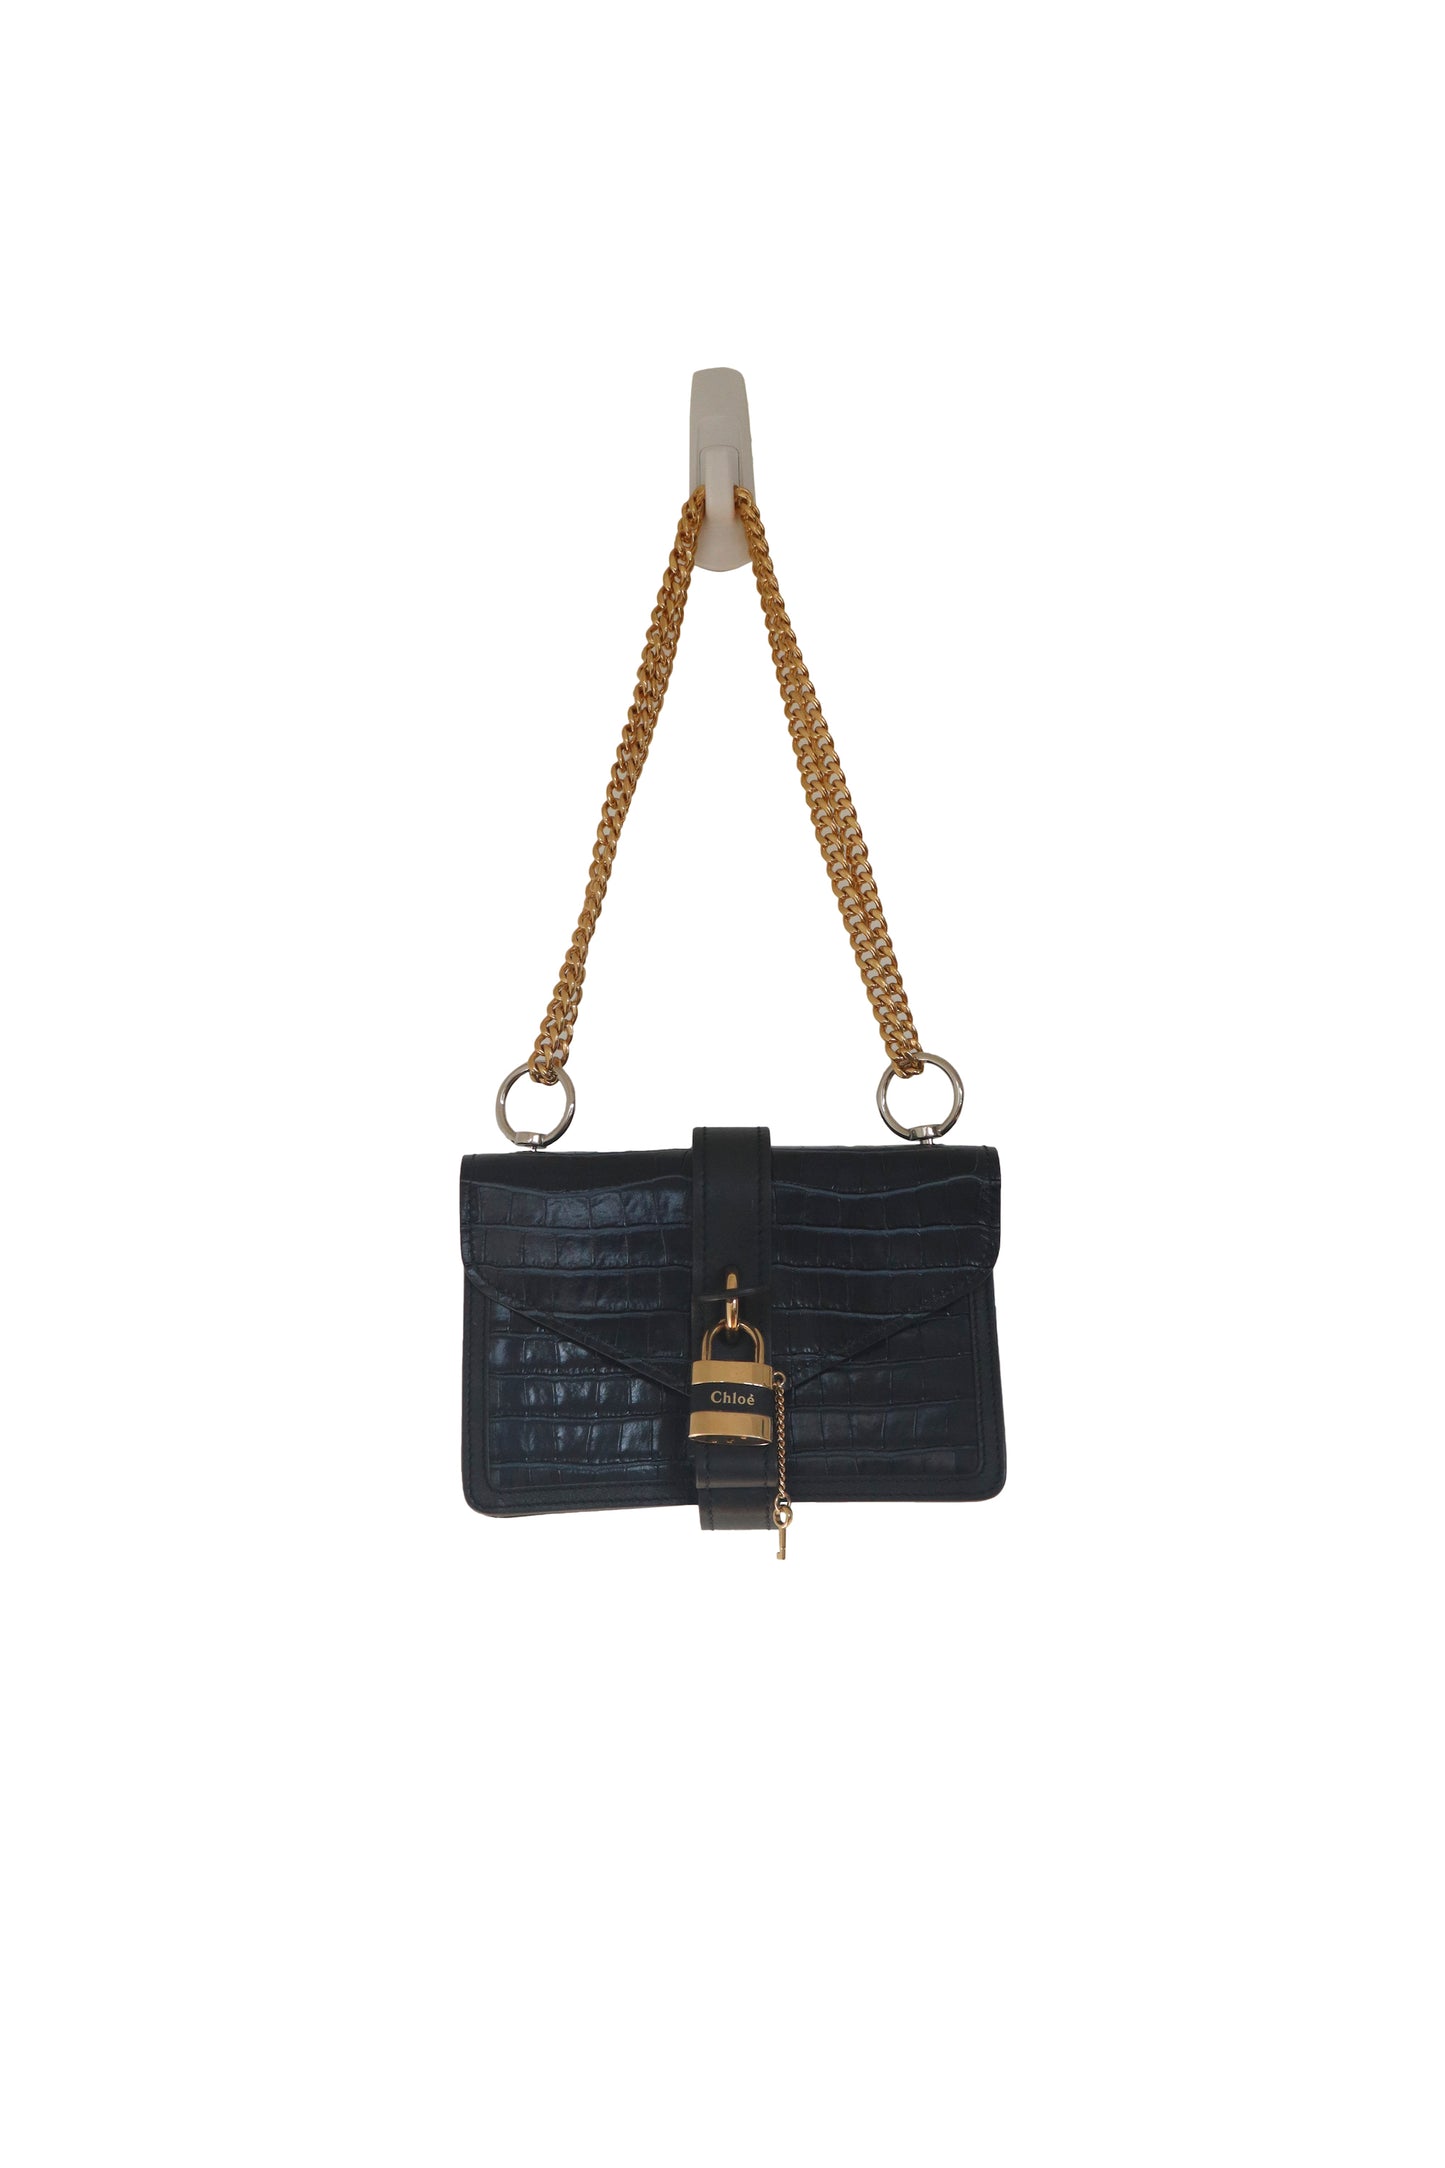 CHLOE - Navy Croc Embossed Leather Mini Aby Chain Shoulder Bag